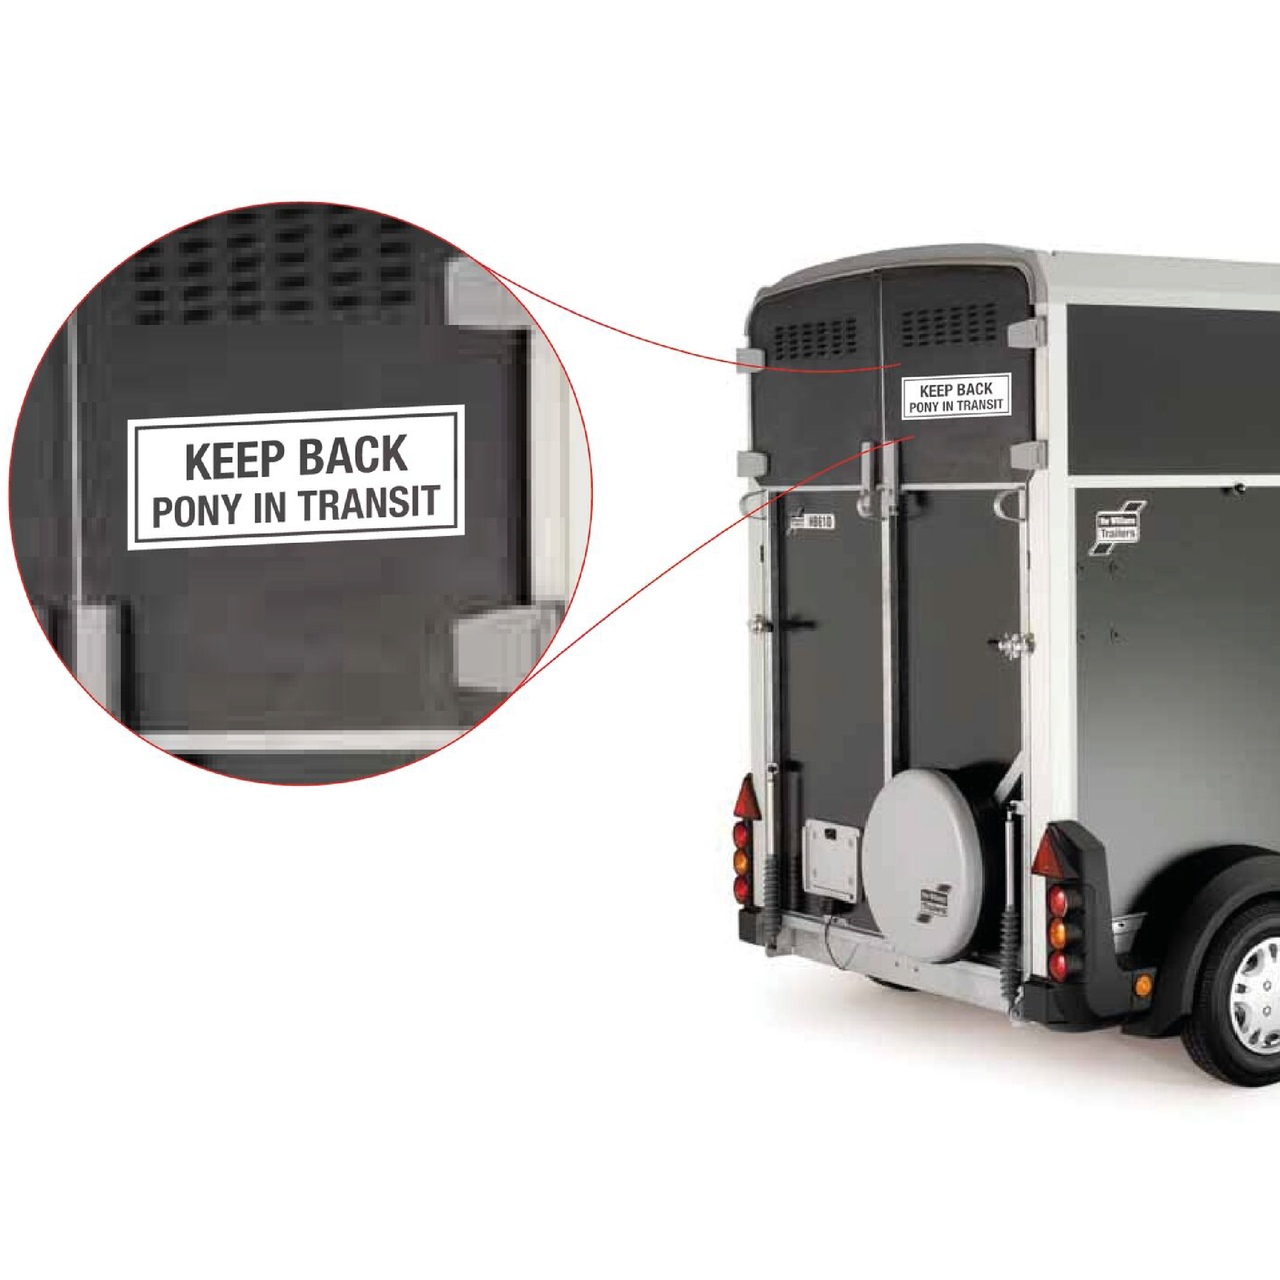 Keep Back Pony in Transit - Horsebox Decal